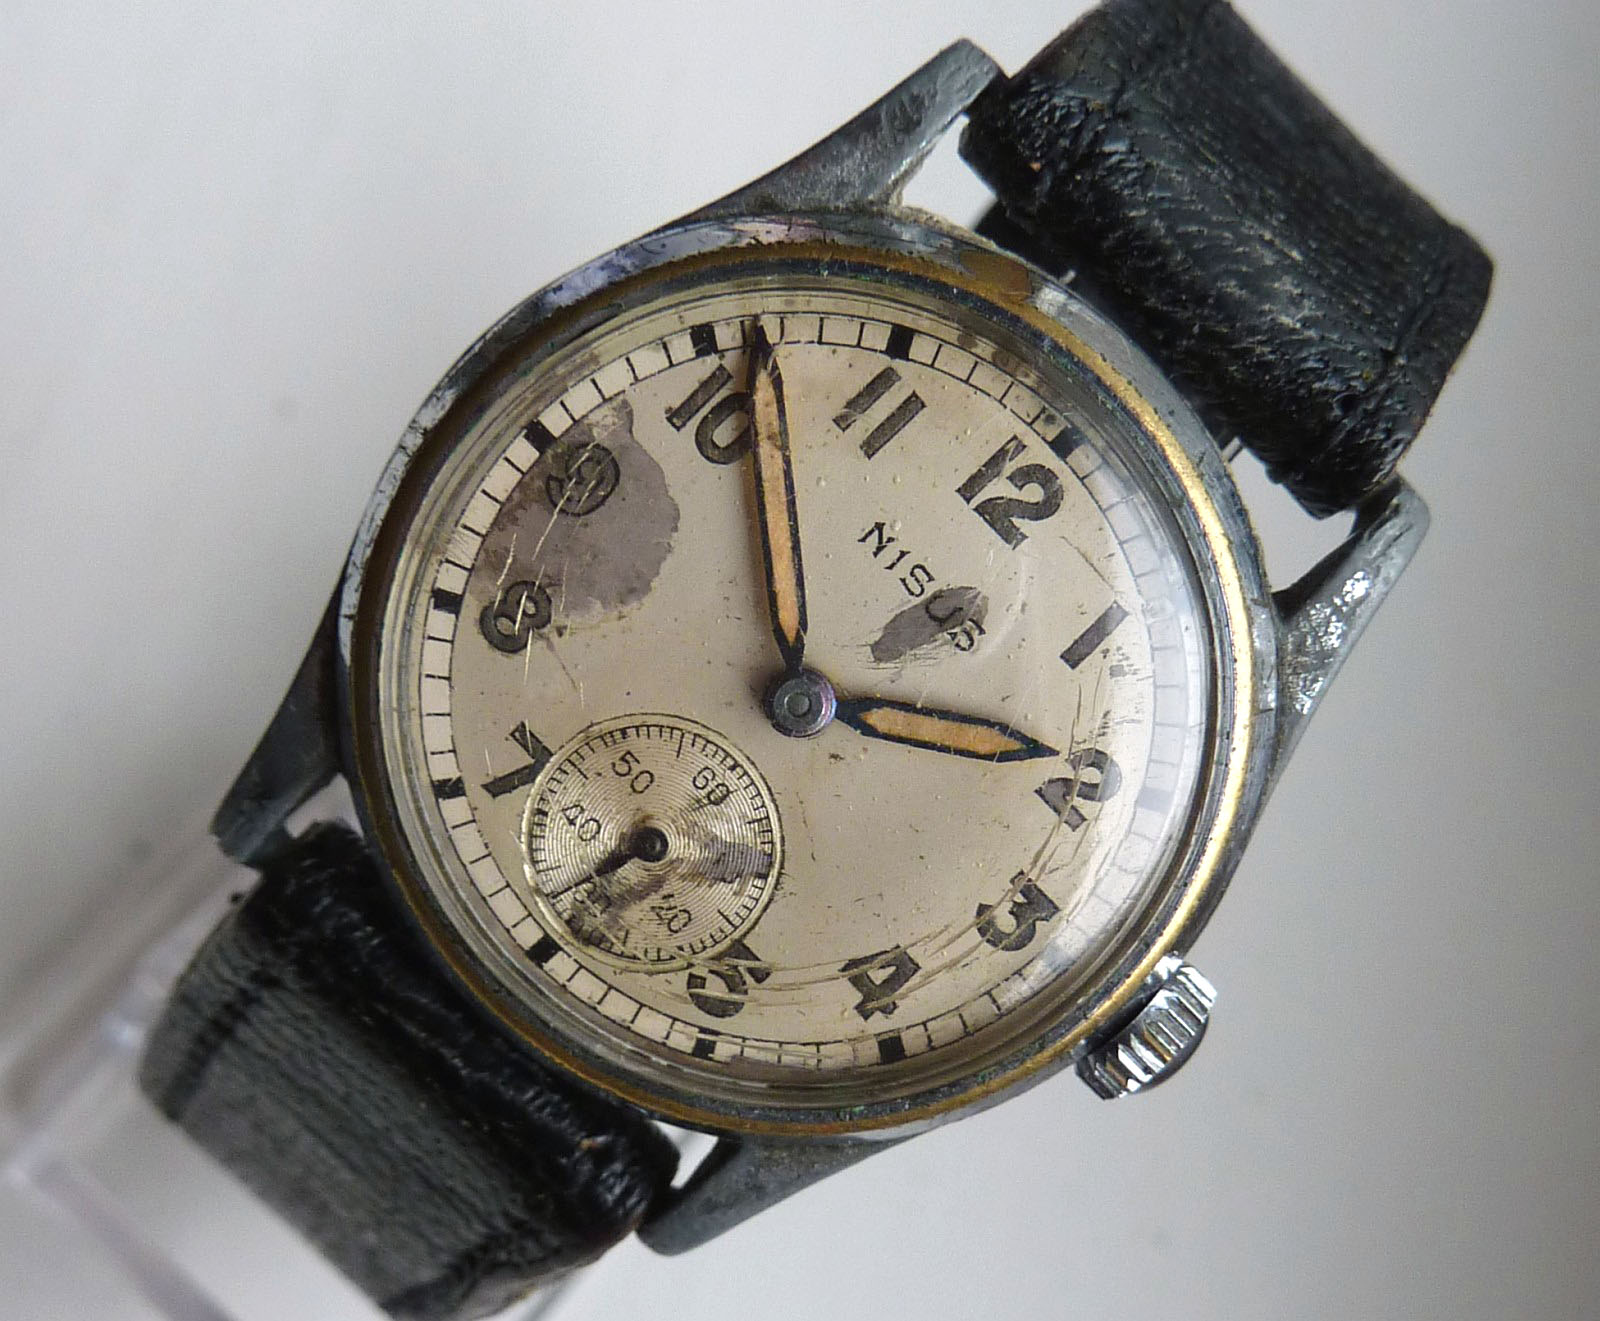 Details about NISUS British Military Watch WWII cal.170 C170 Vintage ...